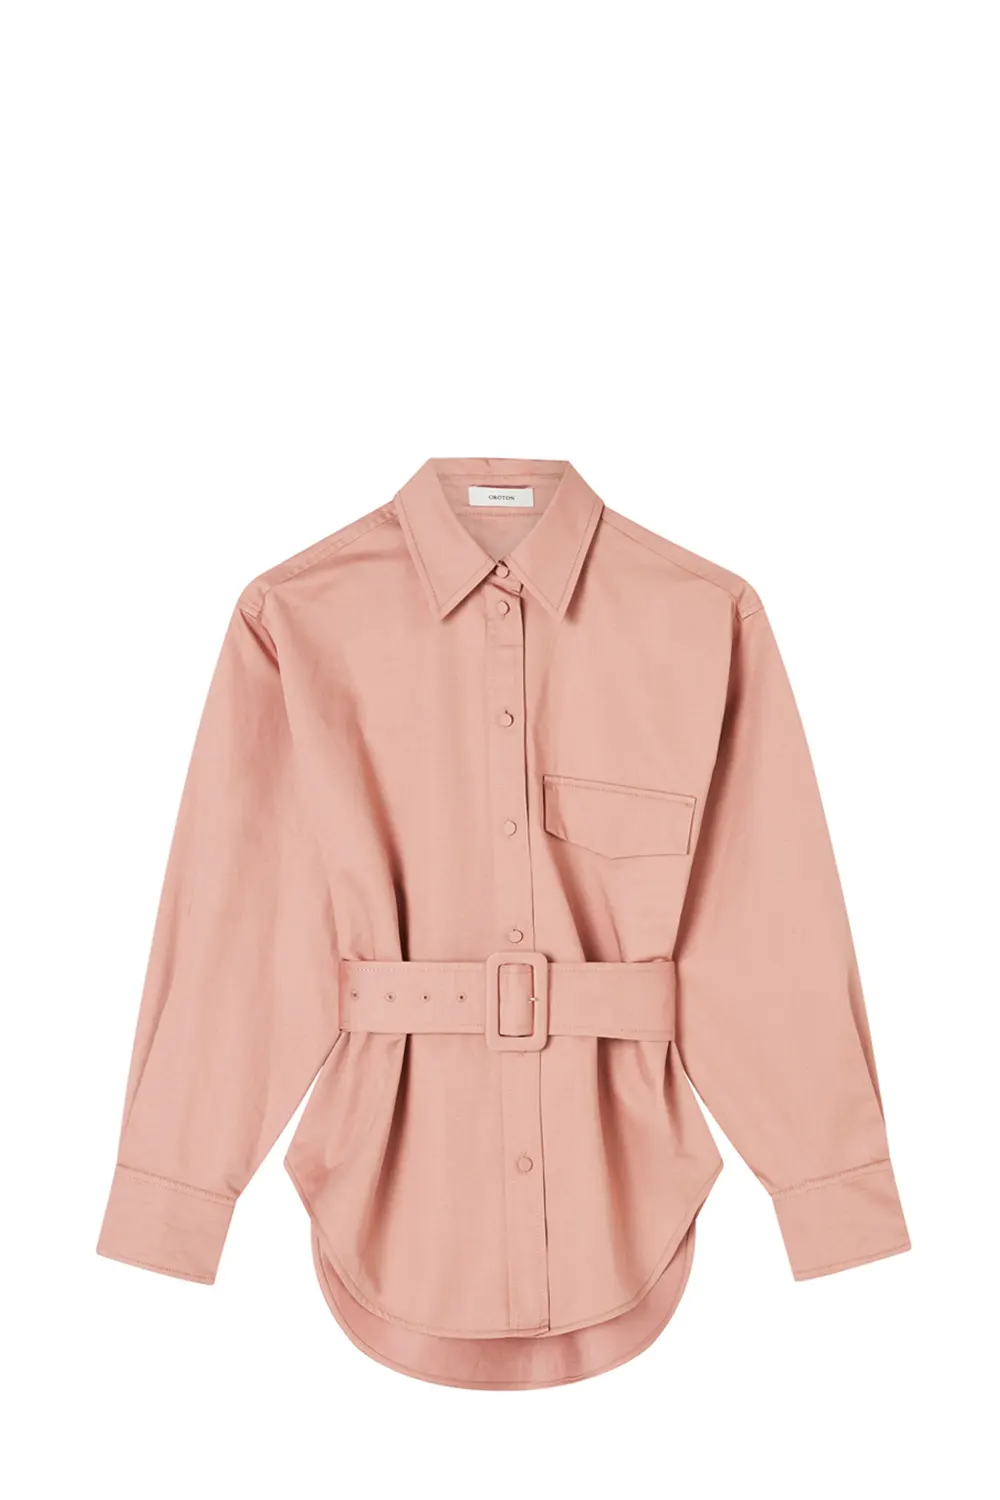 Oroton Sateen Belted Shirt in Pink